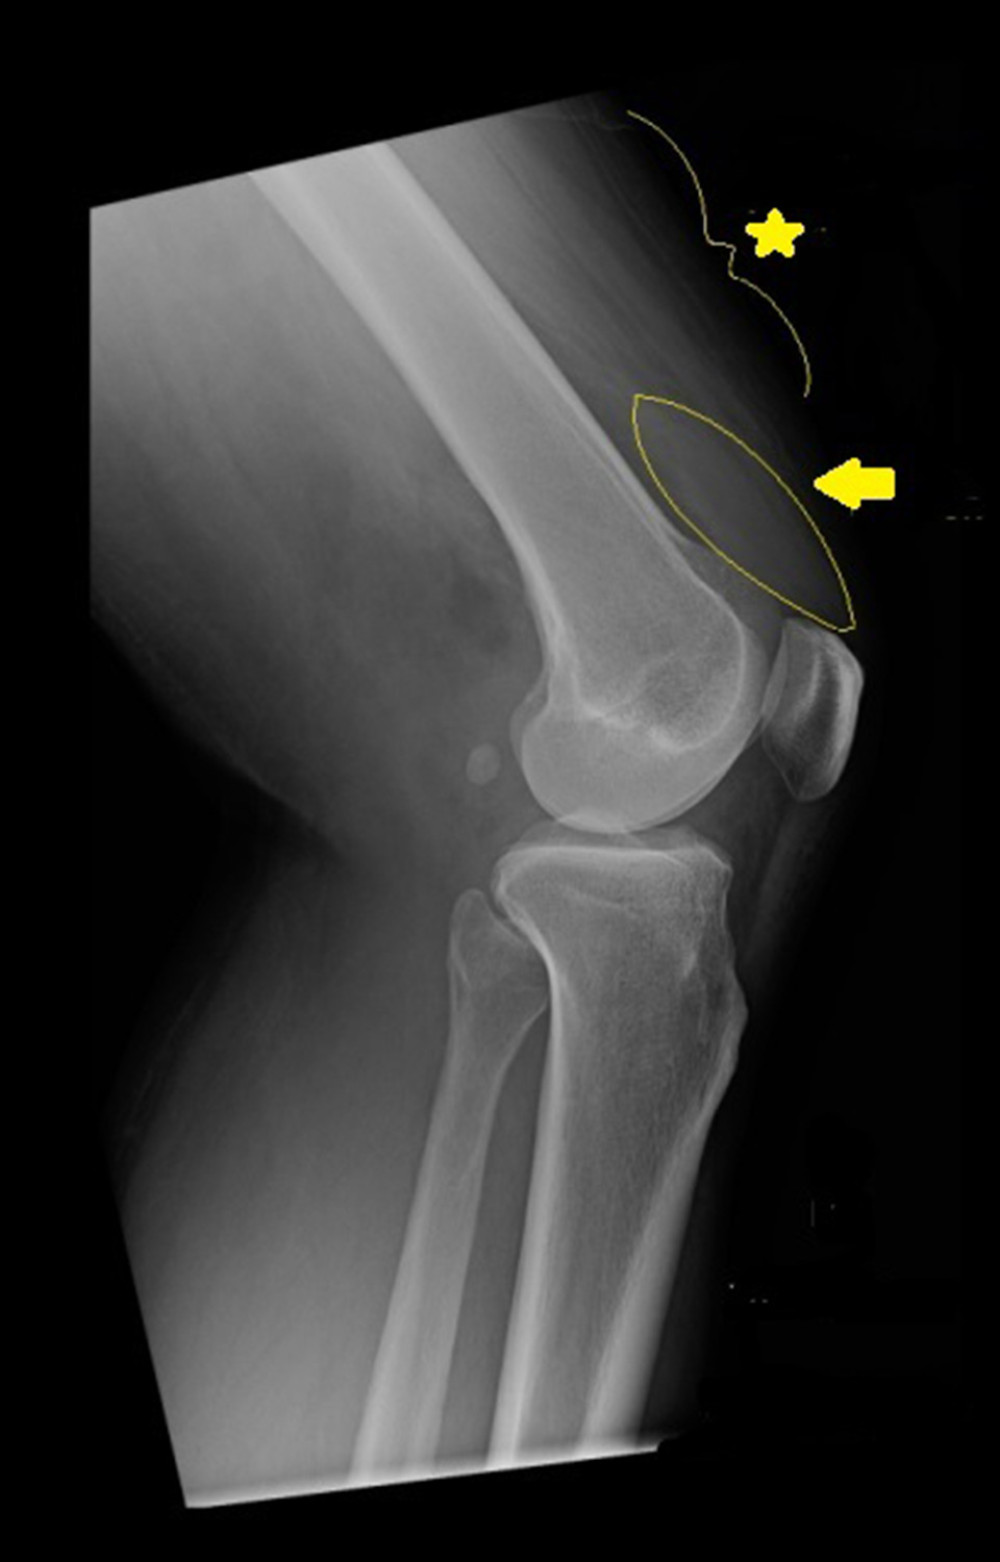 Right knee radiograph with joint effusion (star) and soft tissue swelling (arrow).